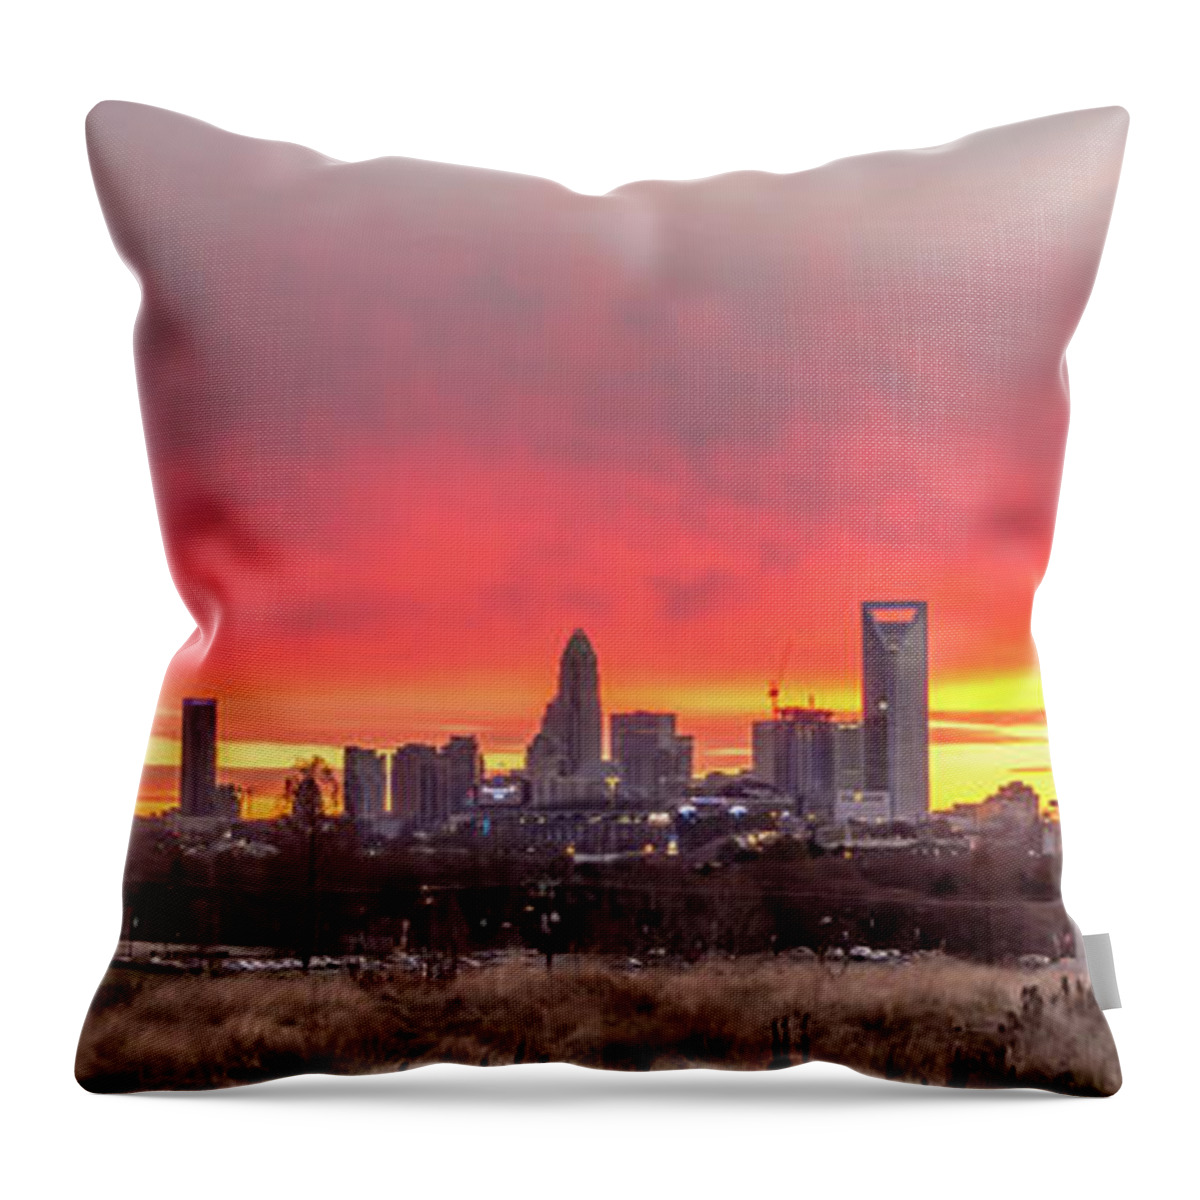 Red Throw Pillow featuring the photograph Charlotte The Queen City Skyline At Sunrise #7 by Alex Grichenko